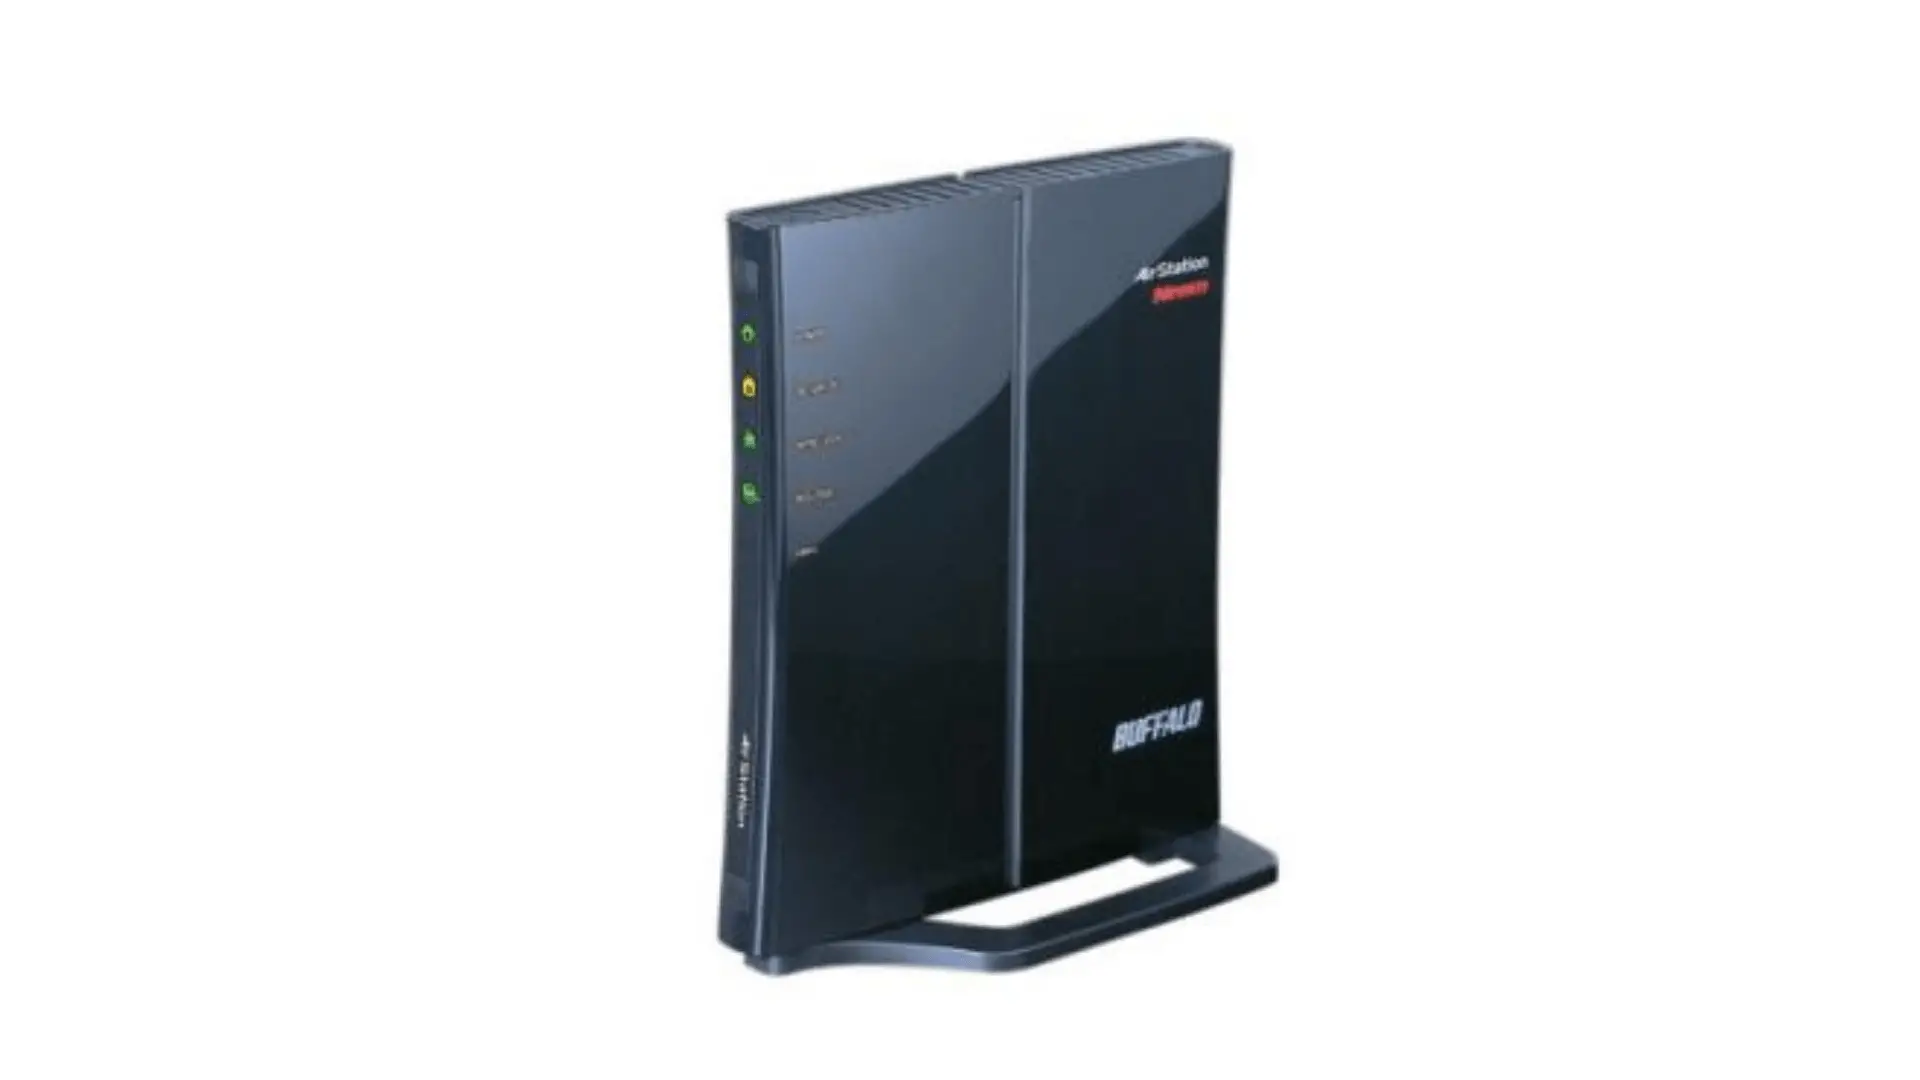 Buffalo WHR-G300N Router